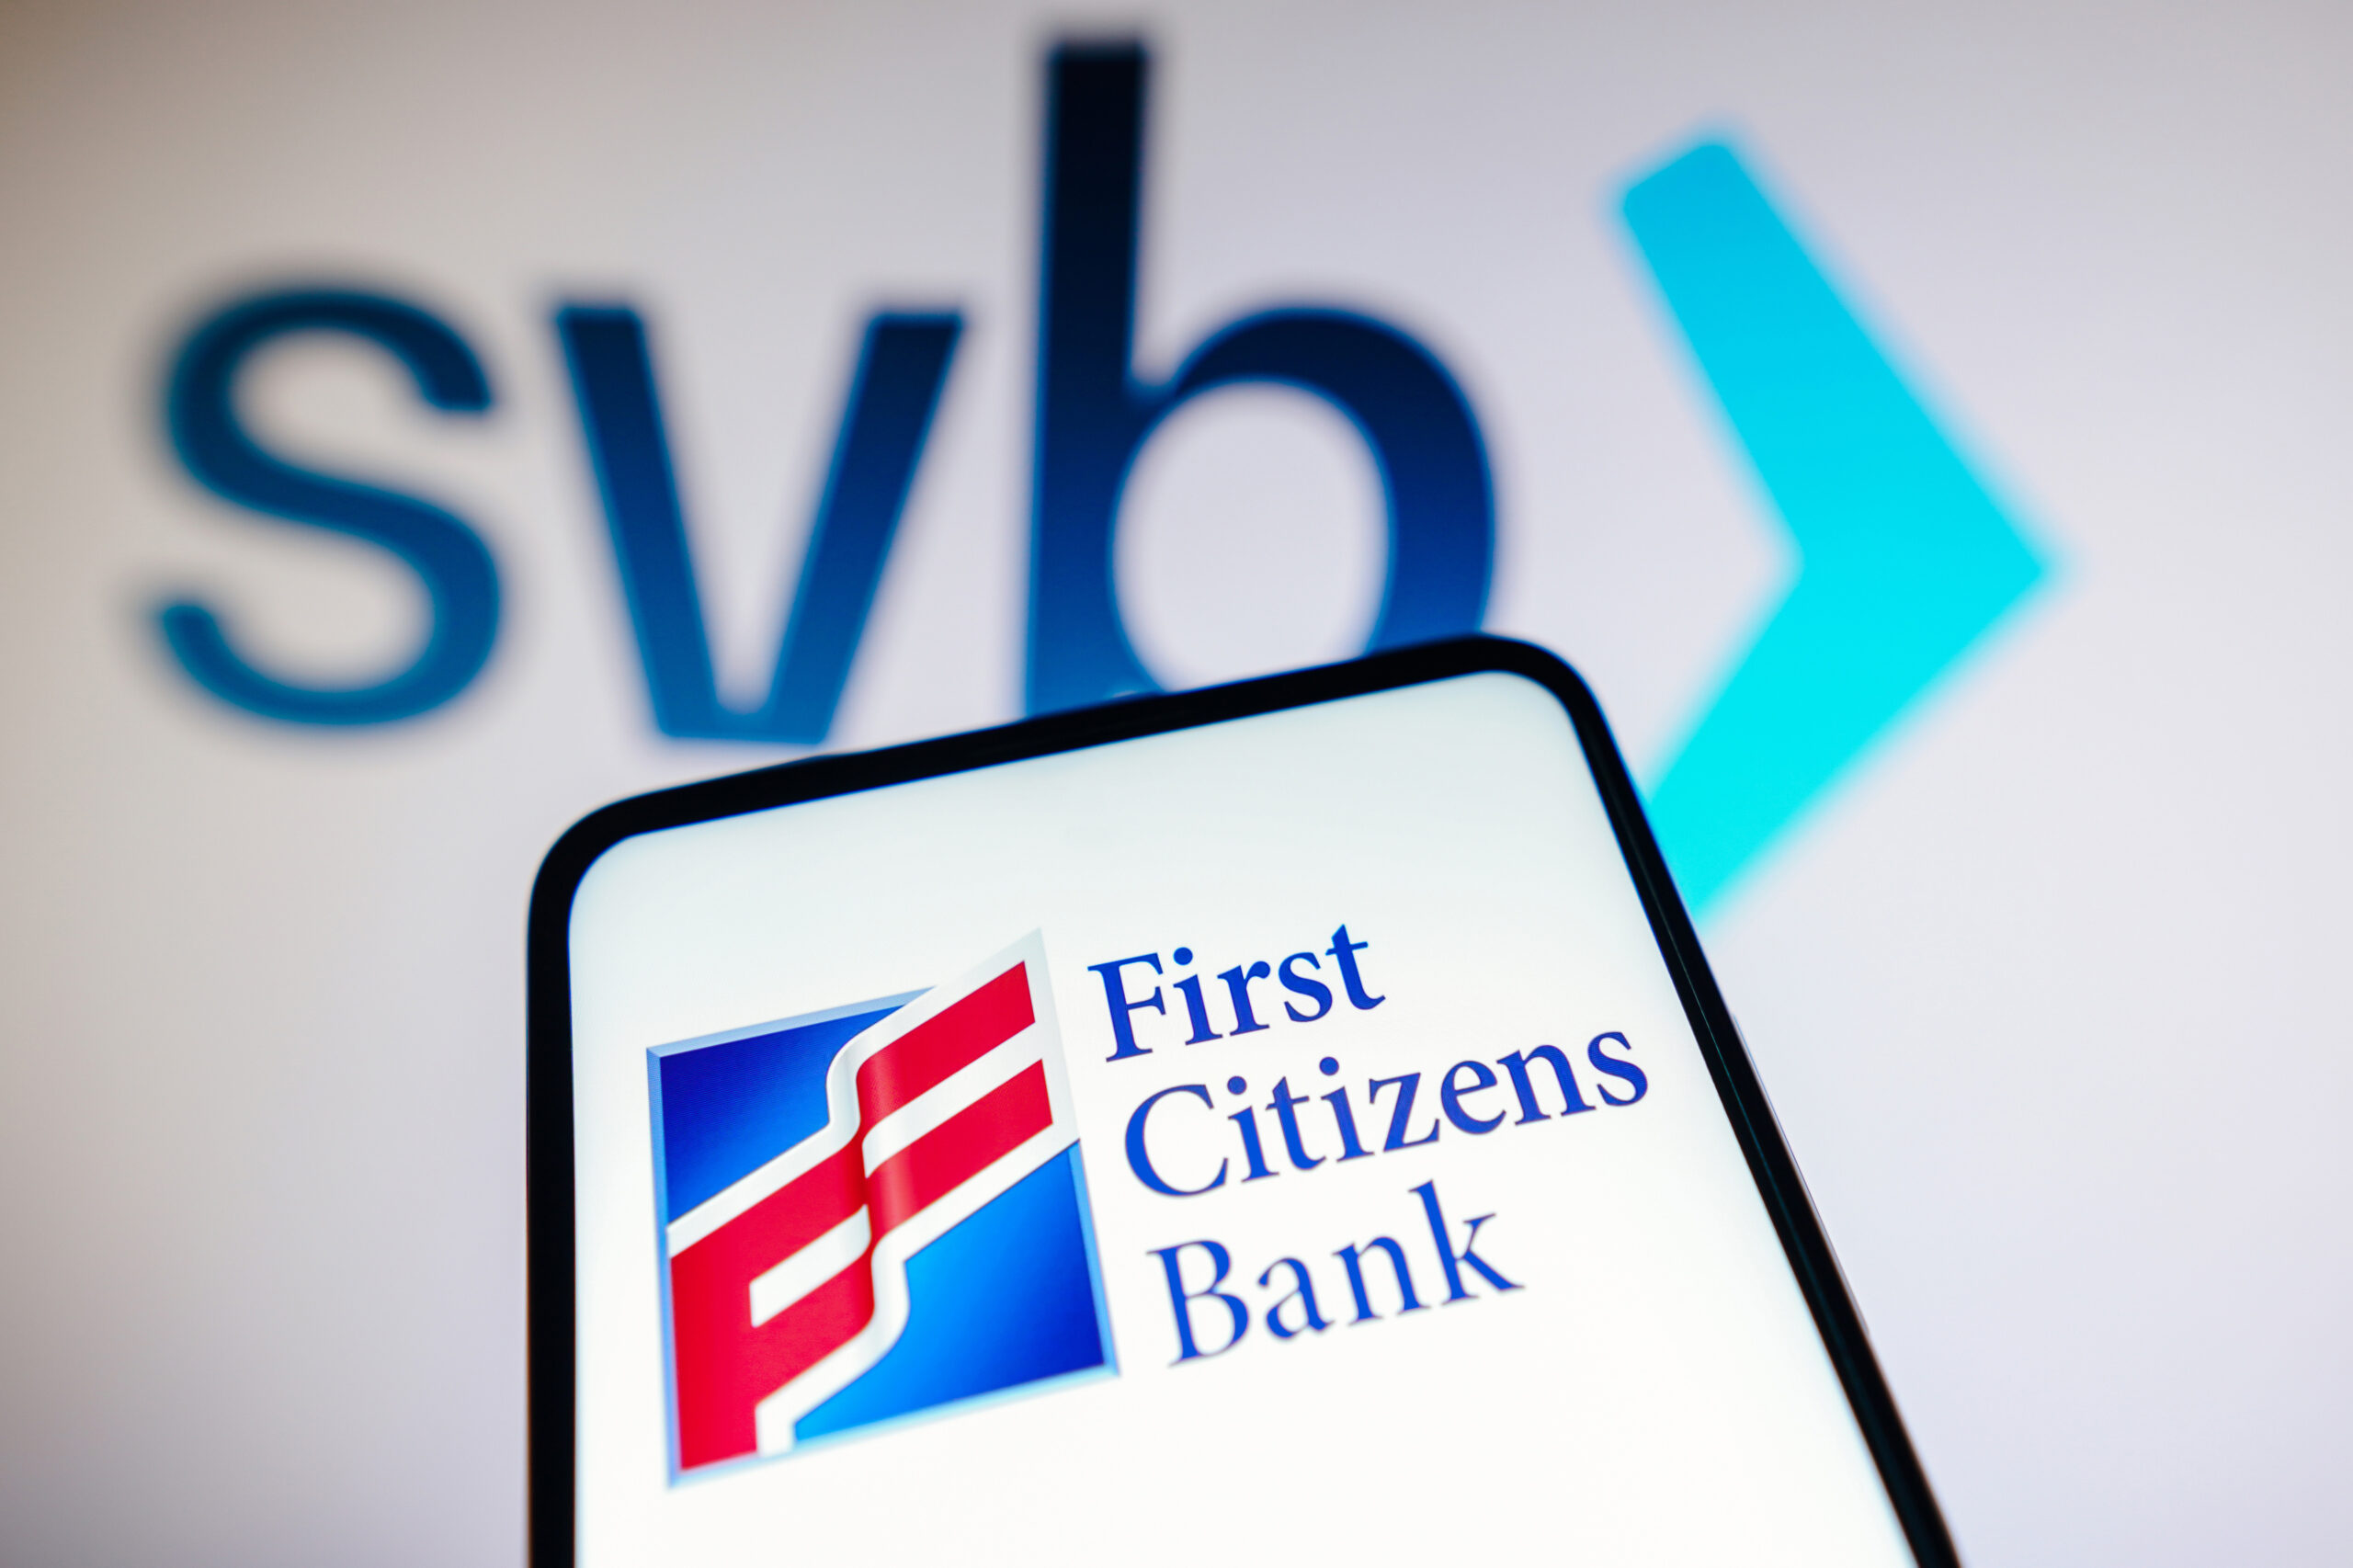 First Citizens Bank Says It’s Committed to Silicon Valley. Others Aren’t Convinced